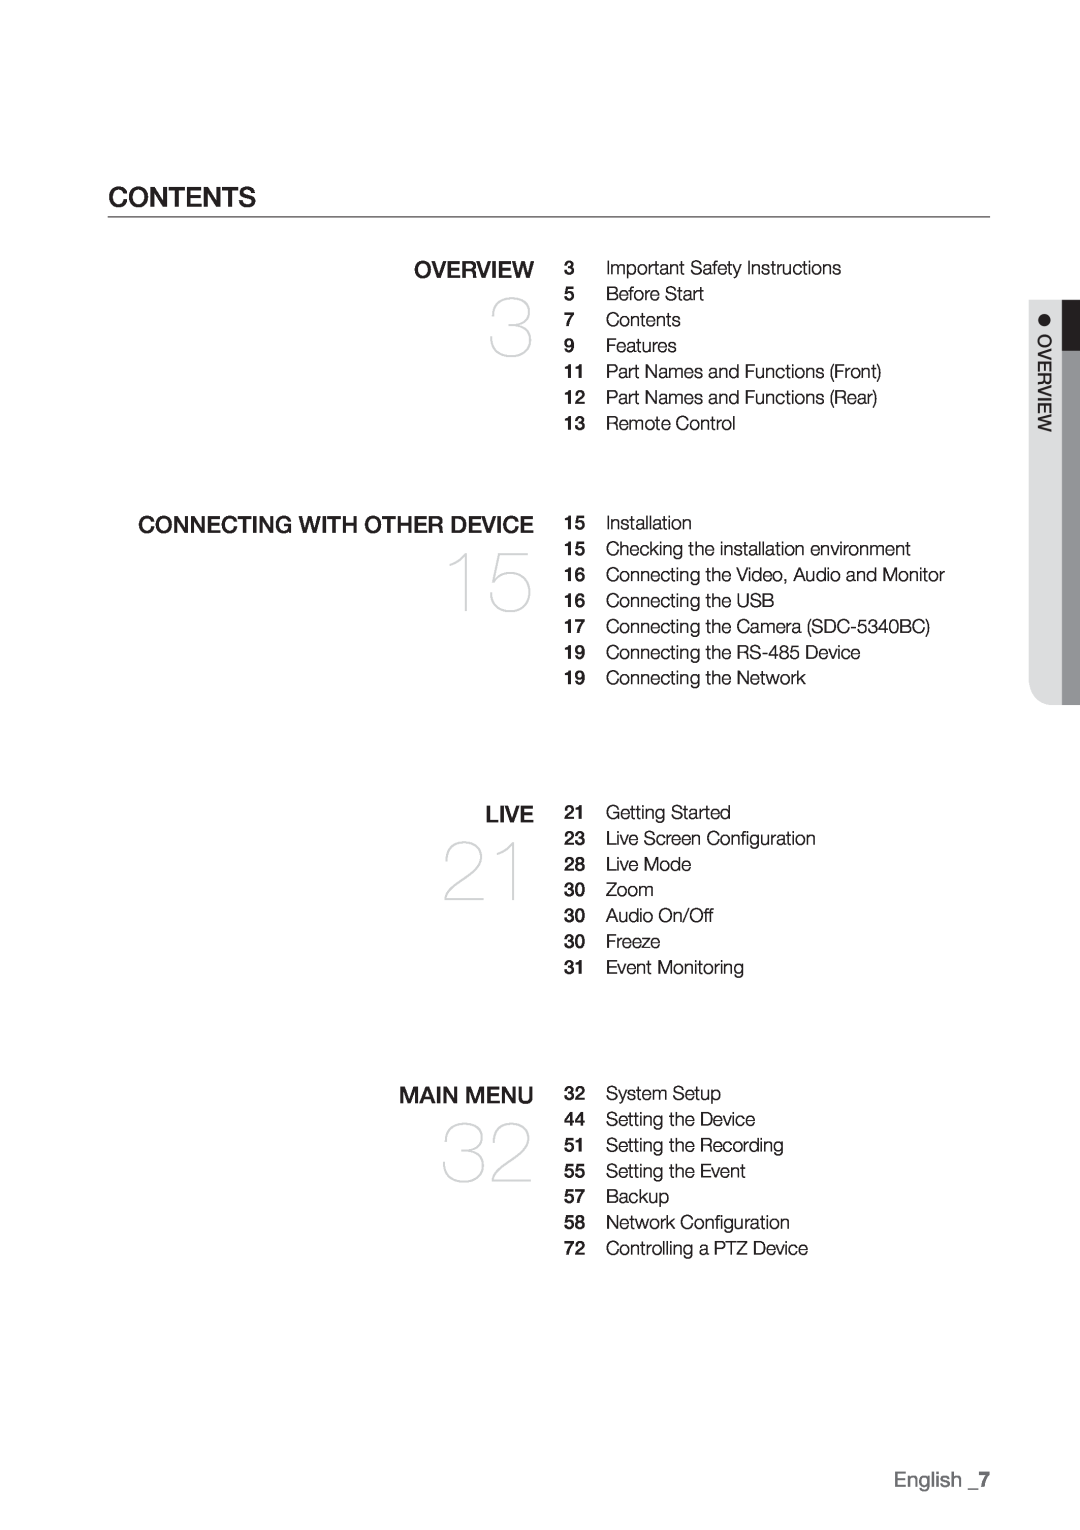 Samsung SDR3100 user manual Contents, overview, connecting with other device, live, main menu, English _7 